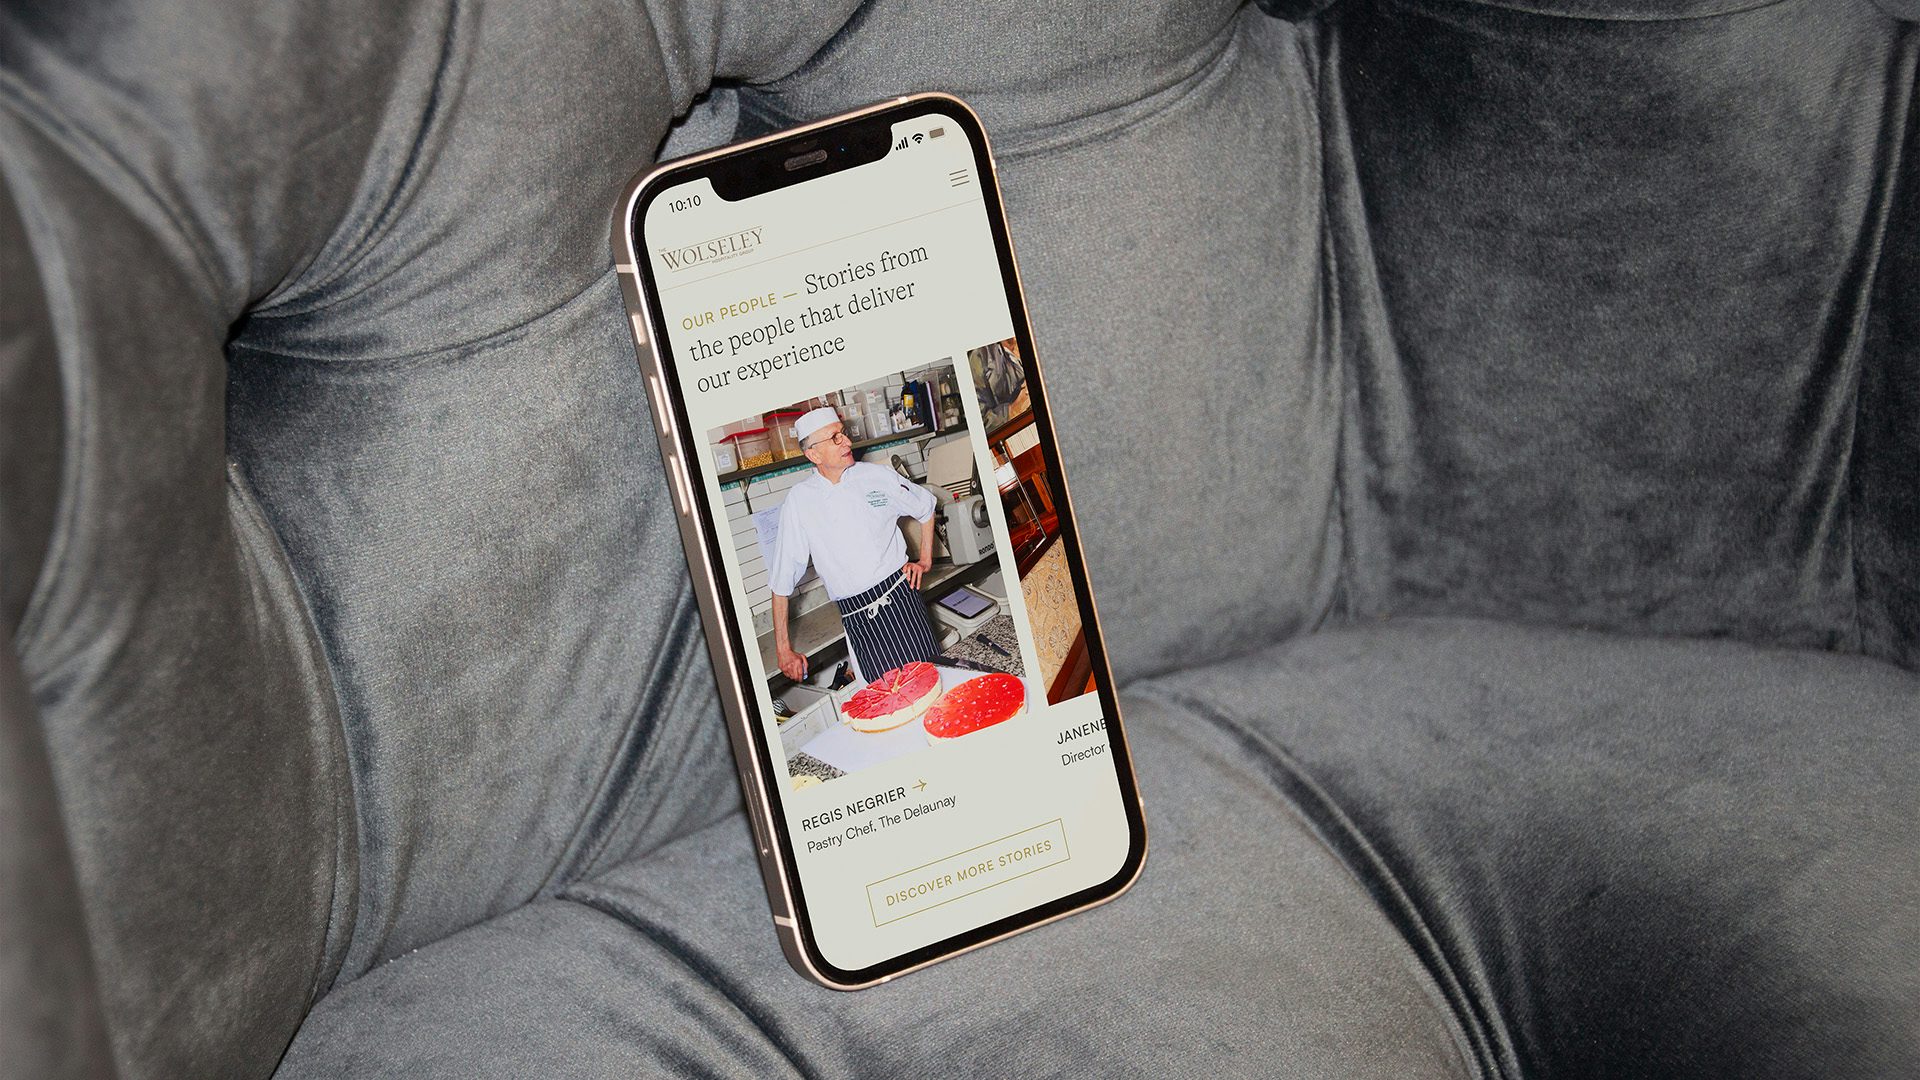 Image from the Wolseley's new digital identity, shown on a photo of a chef with a hand on their hip stood over a dessert and the page headline 'stories from the people that deliver our experience'. The web page is shown on an iPhone resting on a grey velvet couch